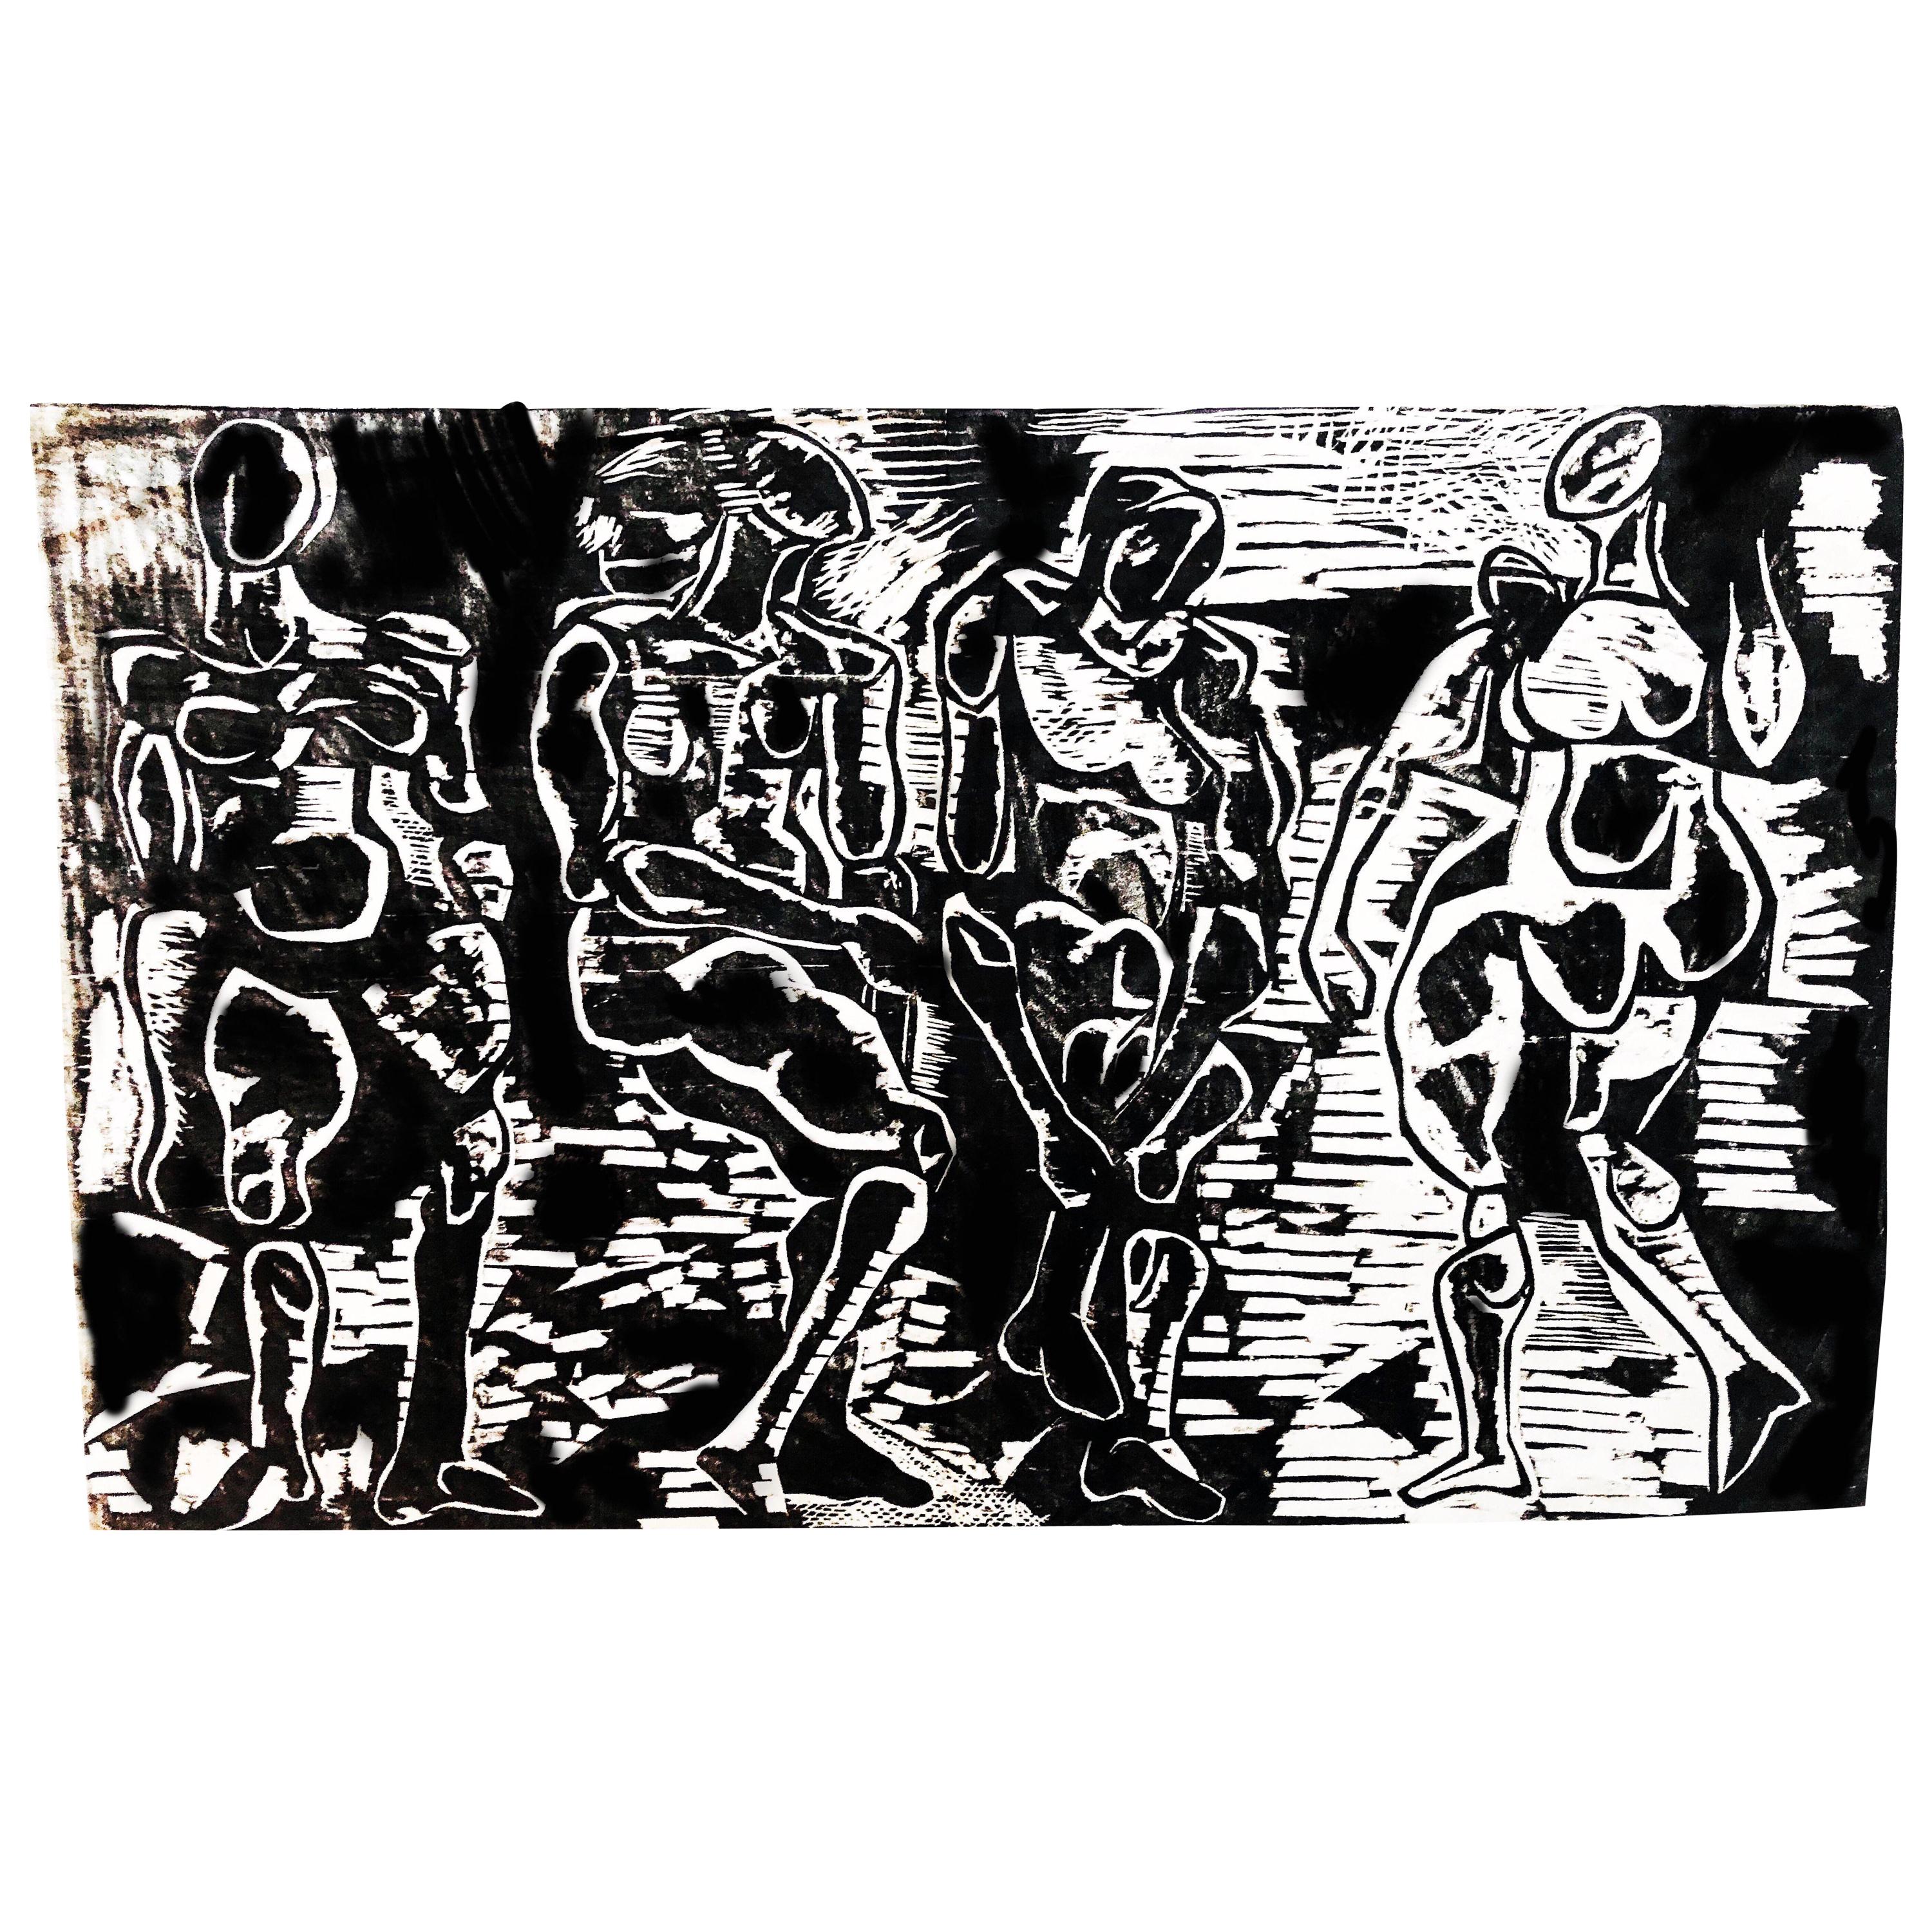 Abstract Woodblock Print Figural Black & White, Nudes, Salvatore Grippi,  1950s